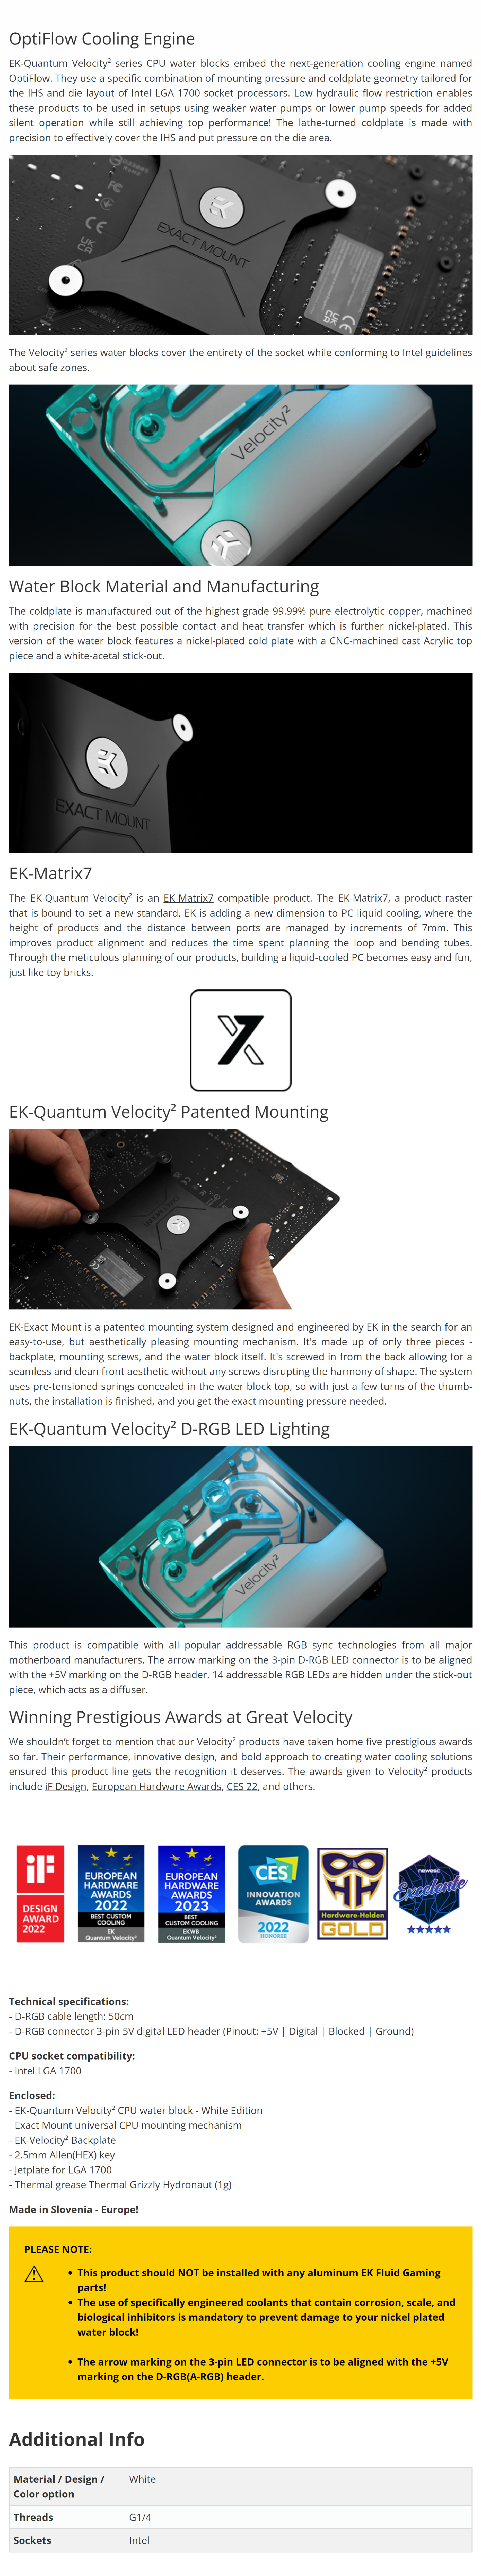 A large marketing image providing additional information about the product EK Quantum Velocity2 LGA1700 D-RGB CPU Waterblock - White - Additional alt info not provided